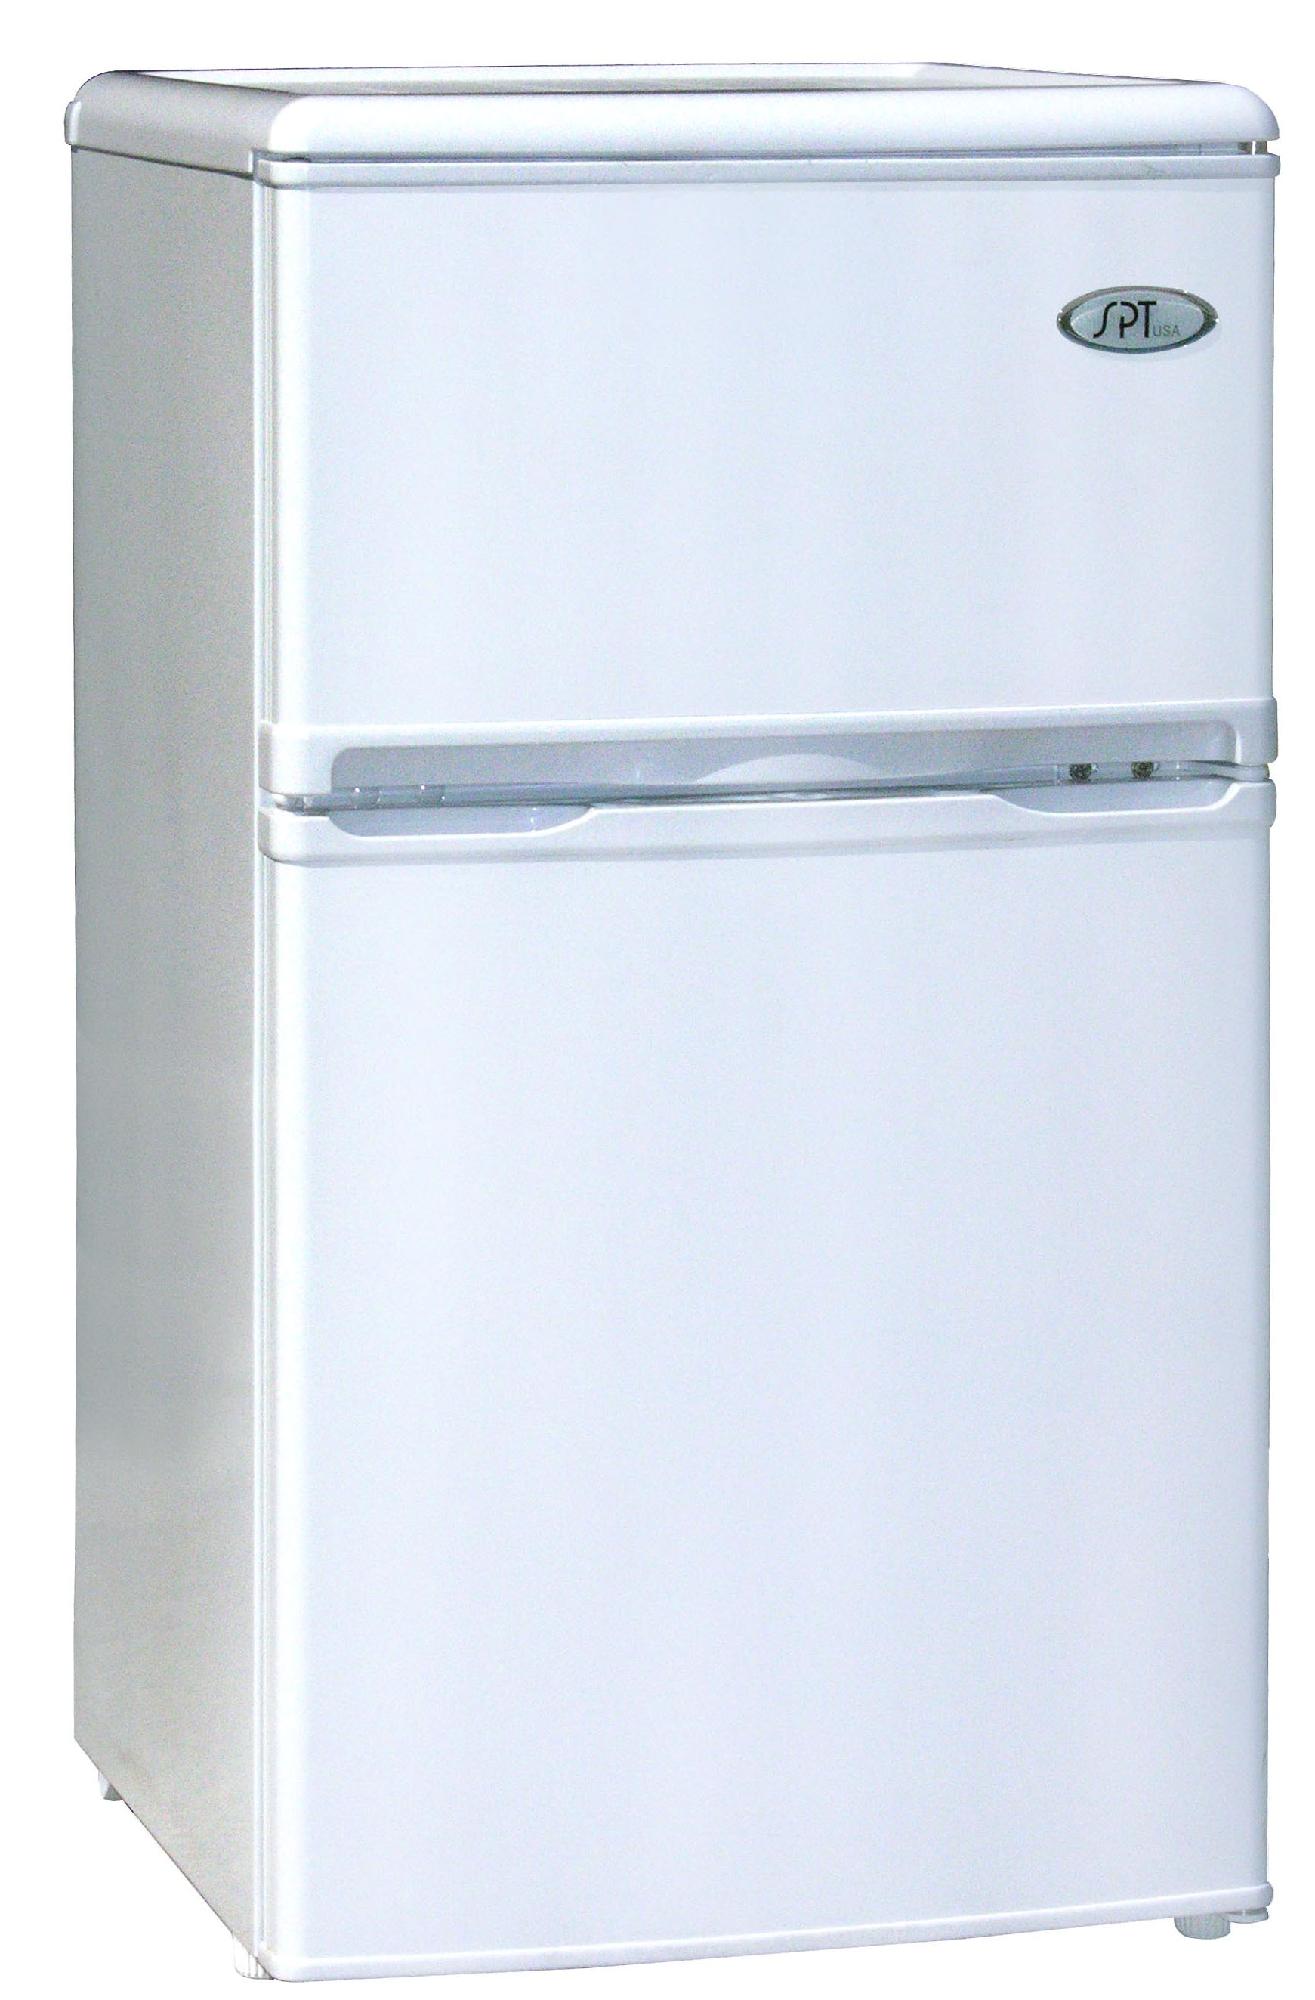 SPT RF-322W 3.2 cu.ft. Double Door Refrigerator with Energy Star - White